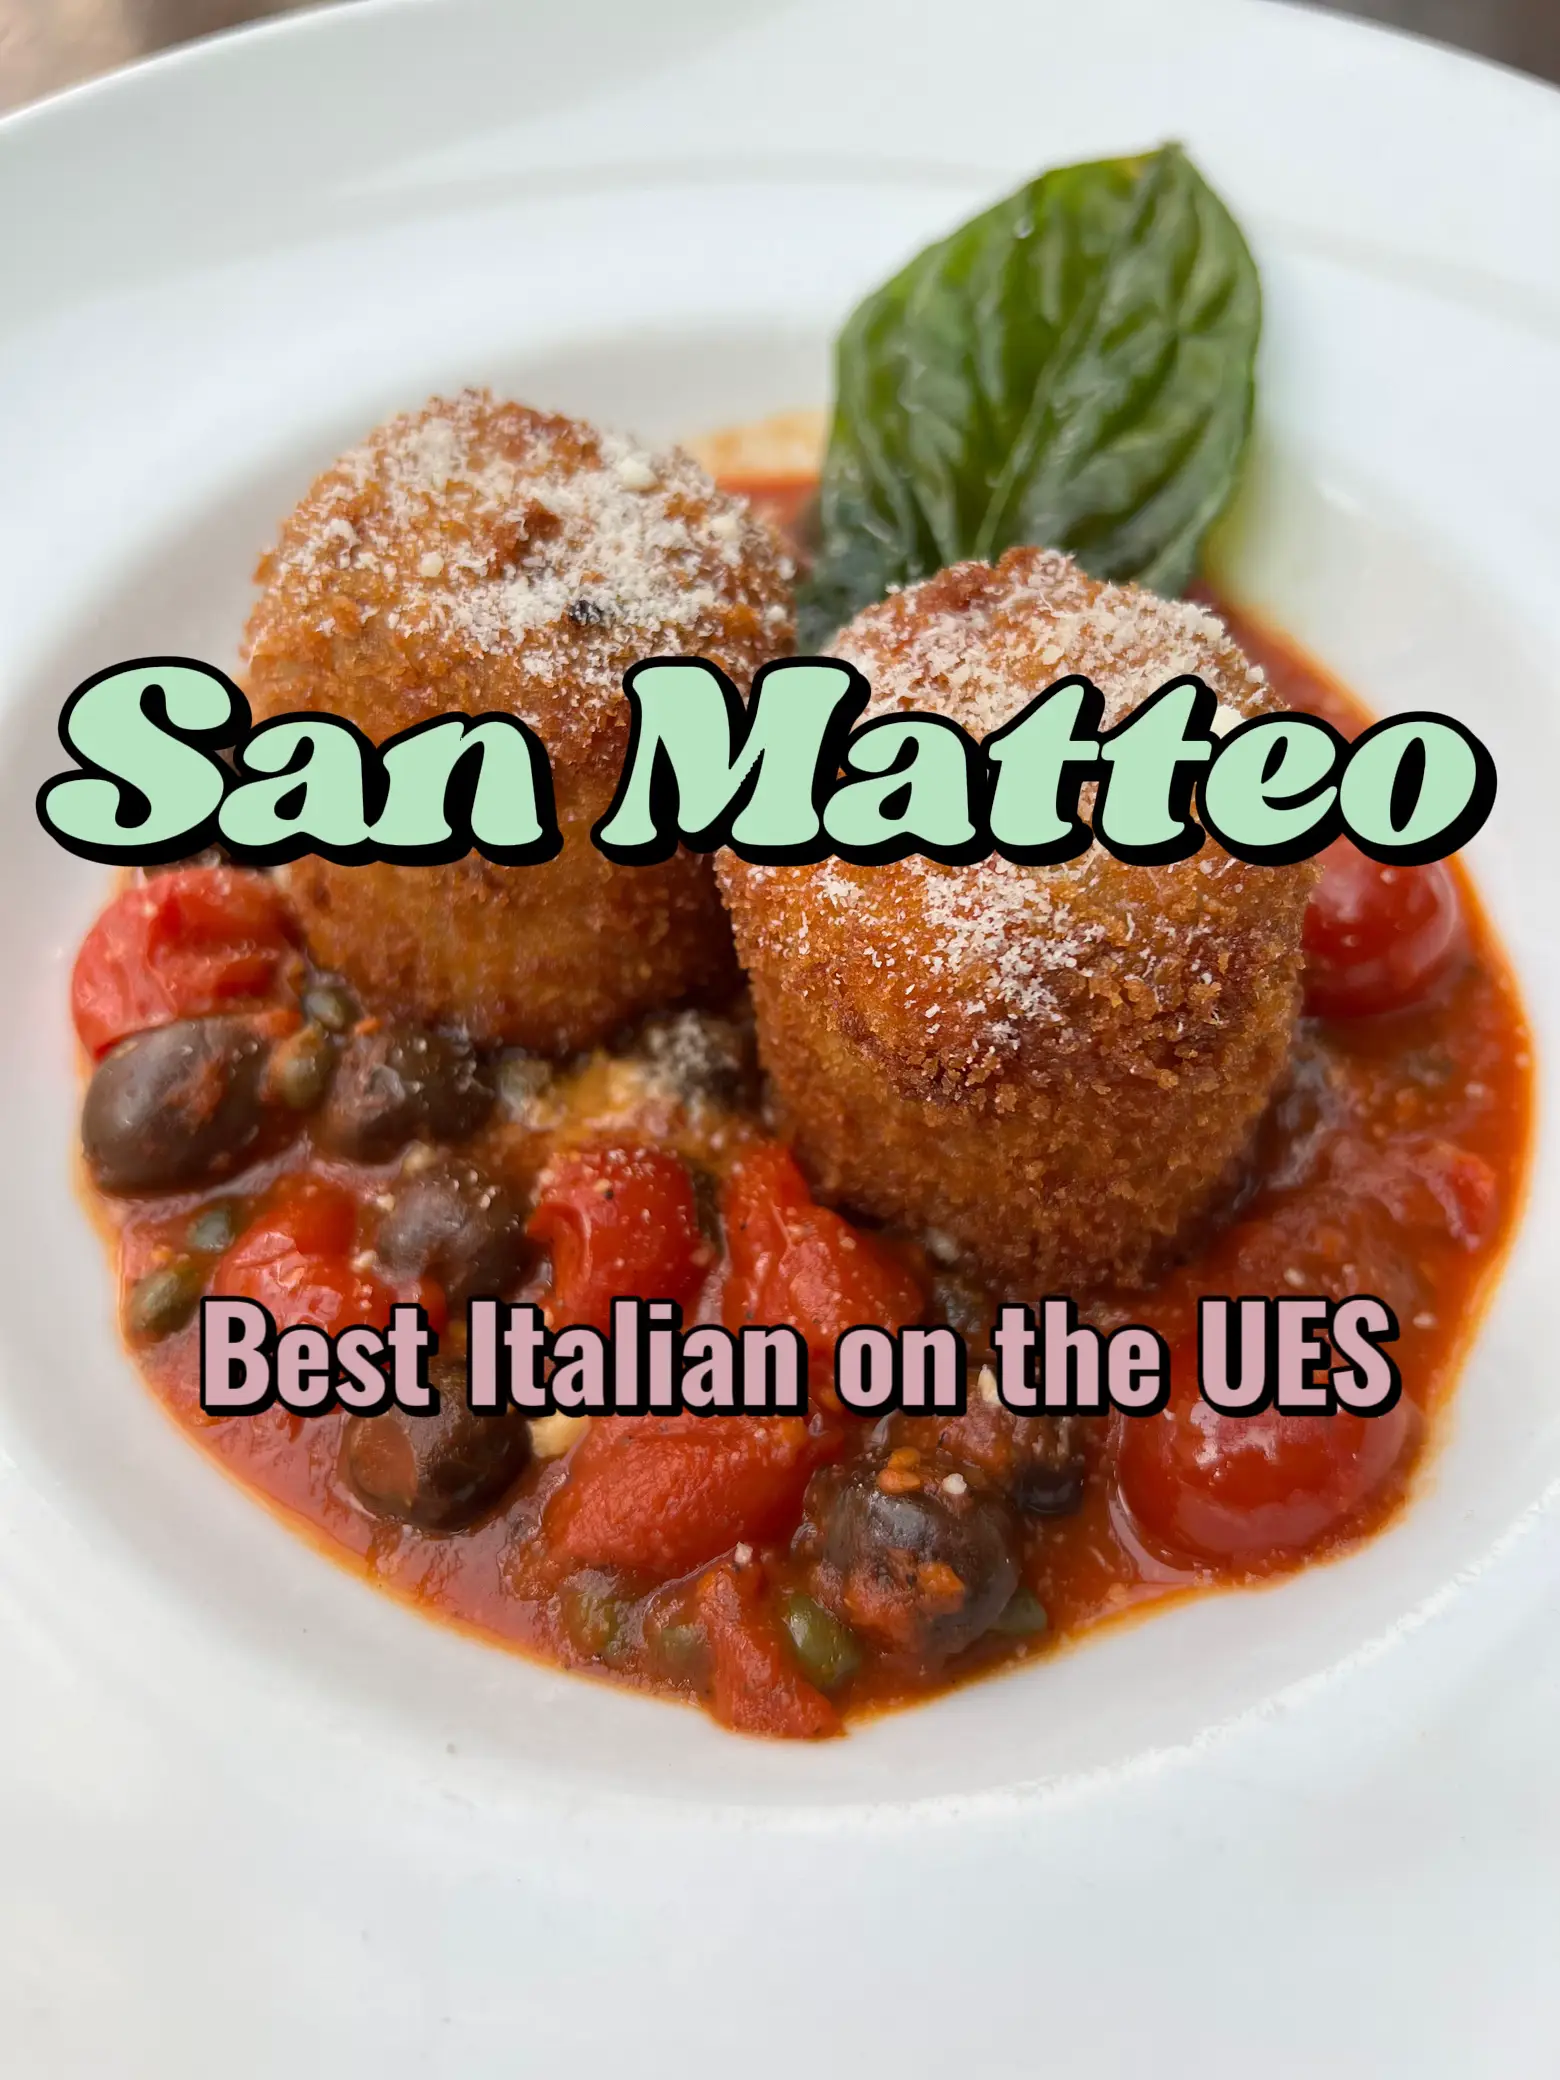 Best Italian on the UES's images